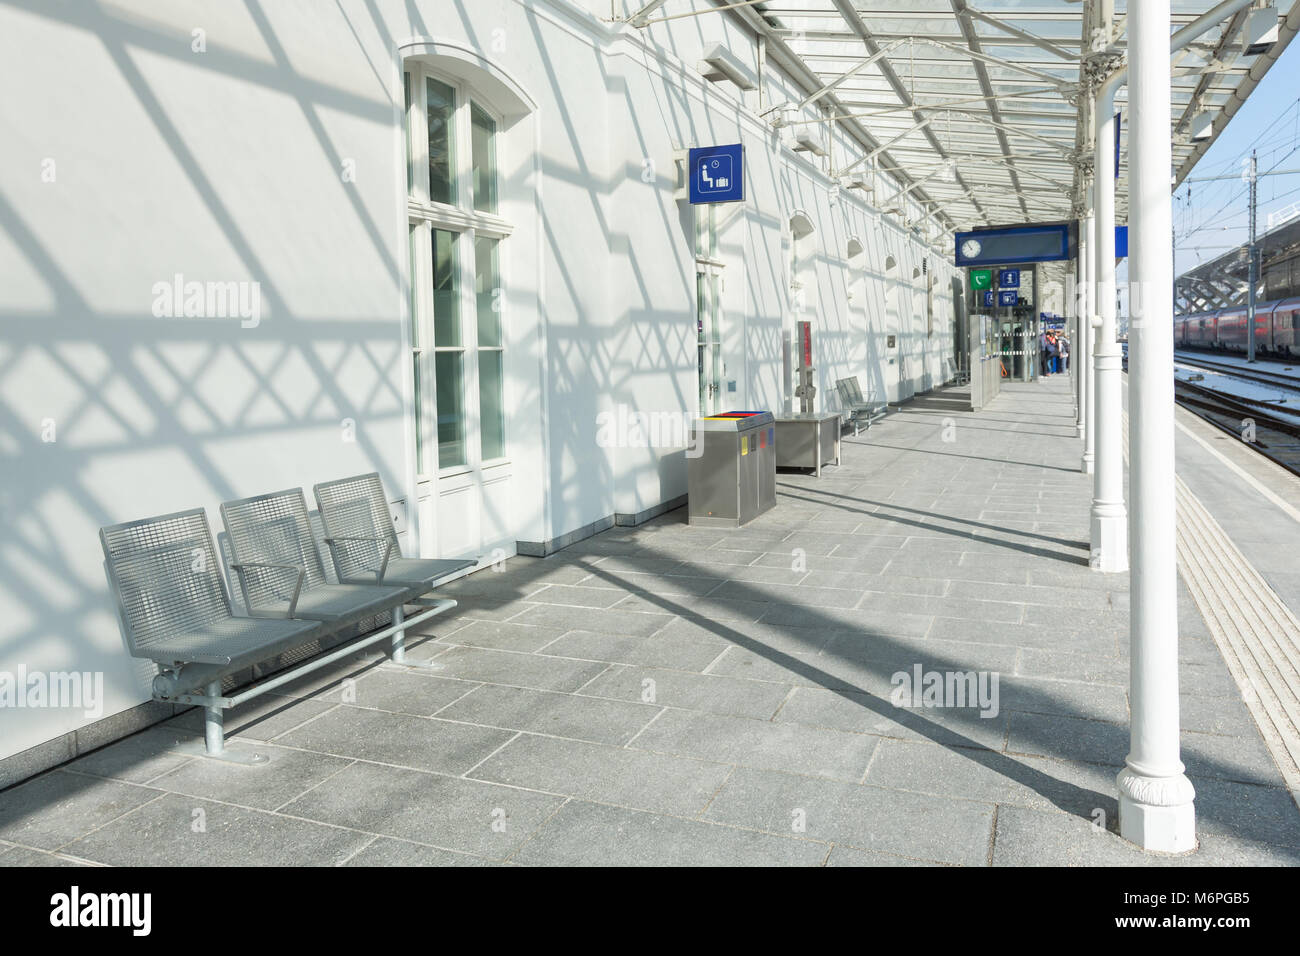 Modern train station wainting area on the platform with chairs and sign. Stock Photo